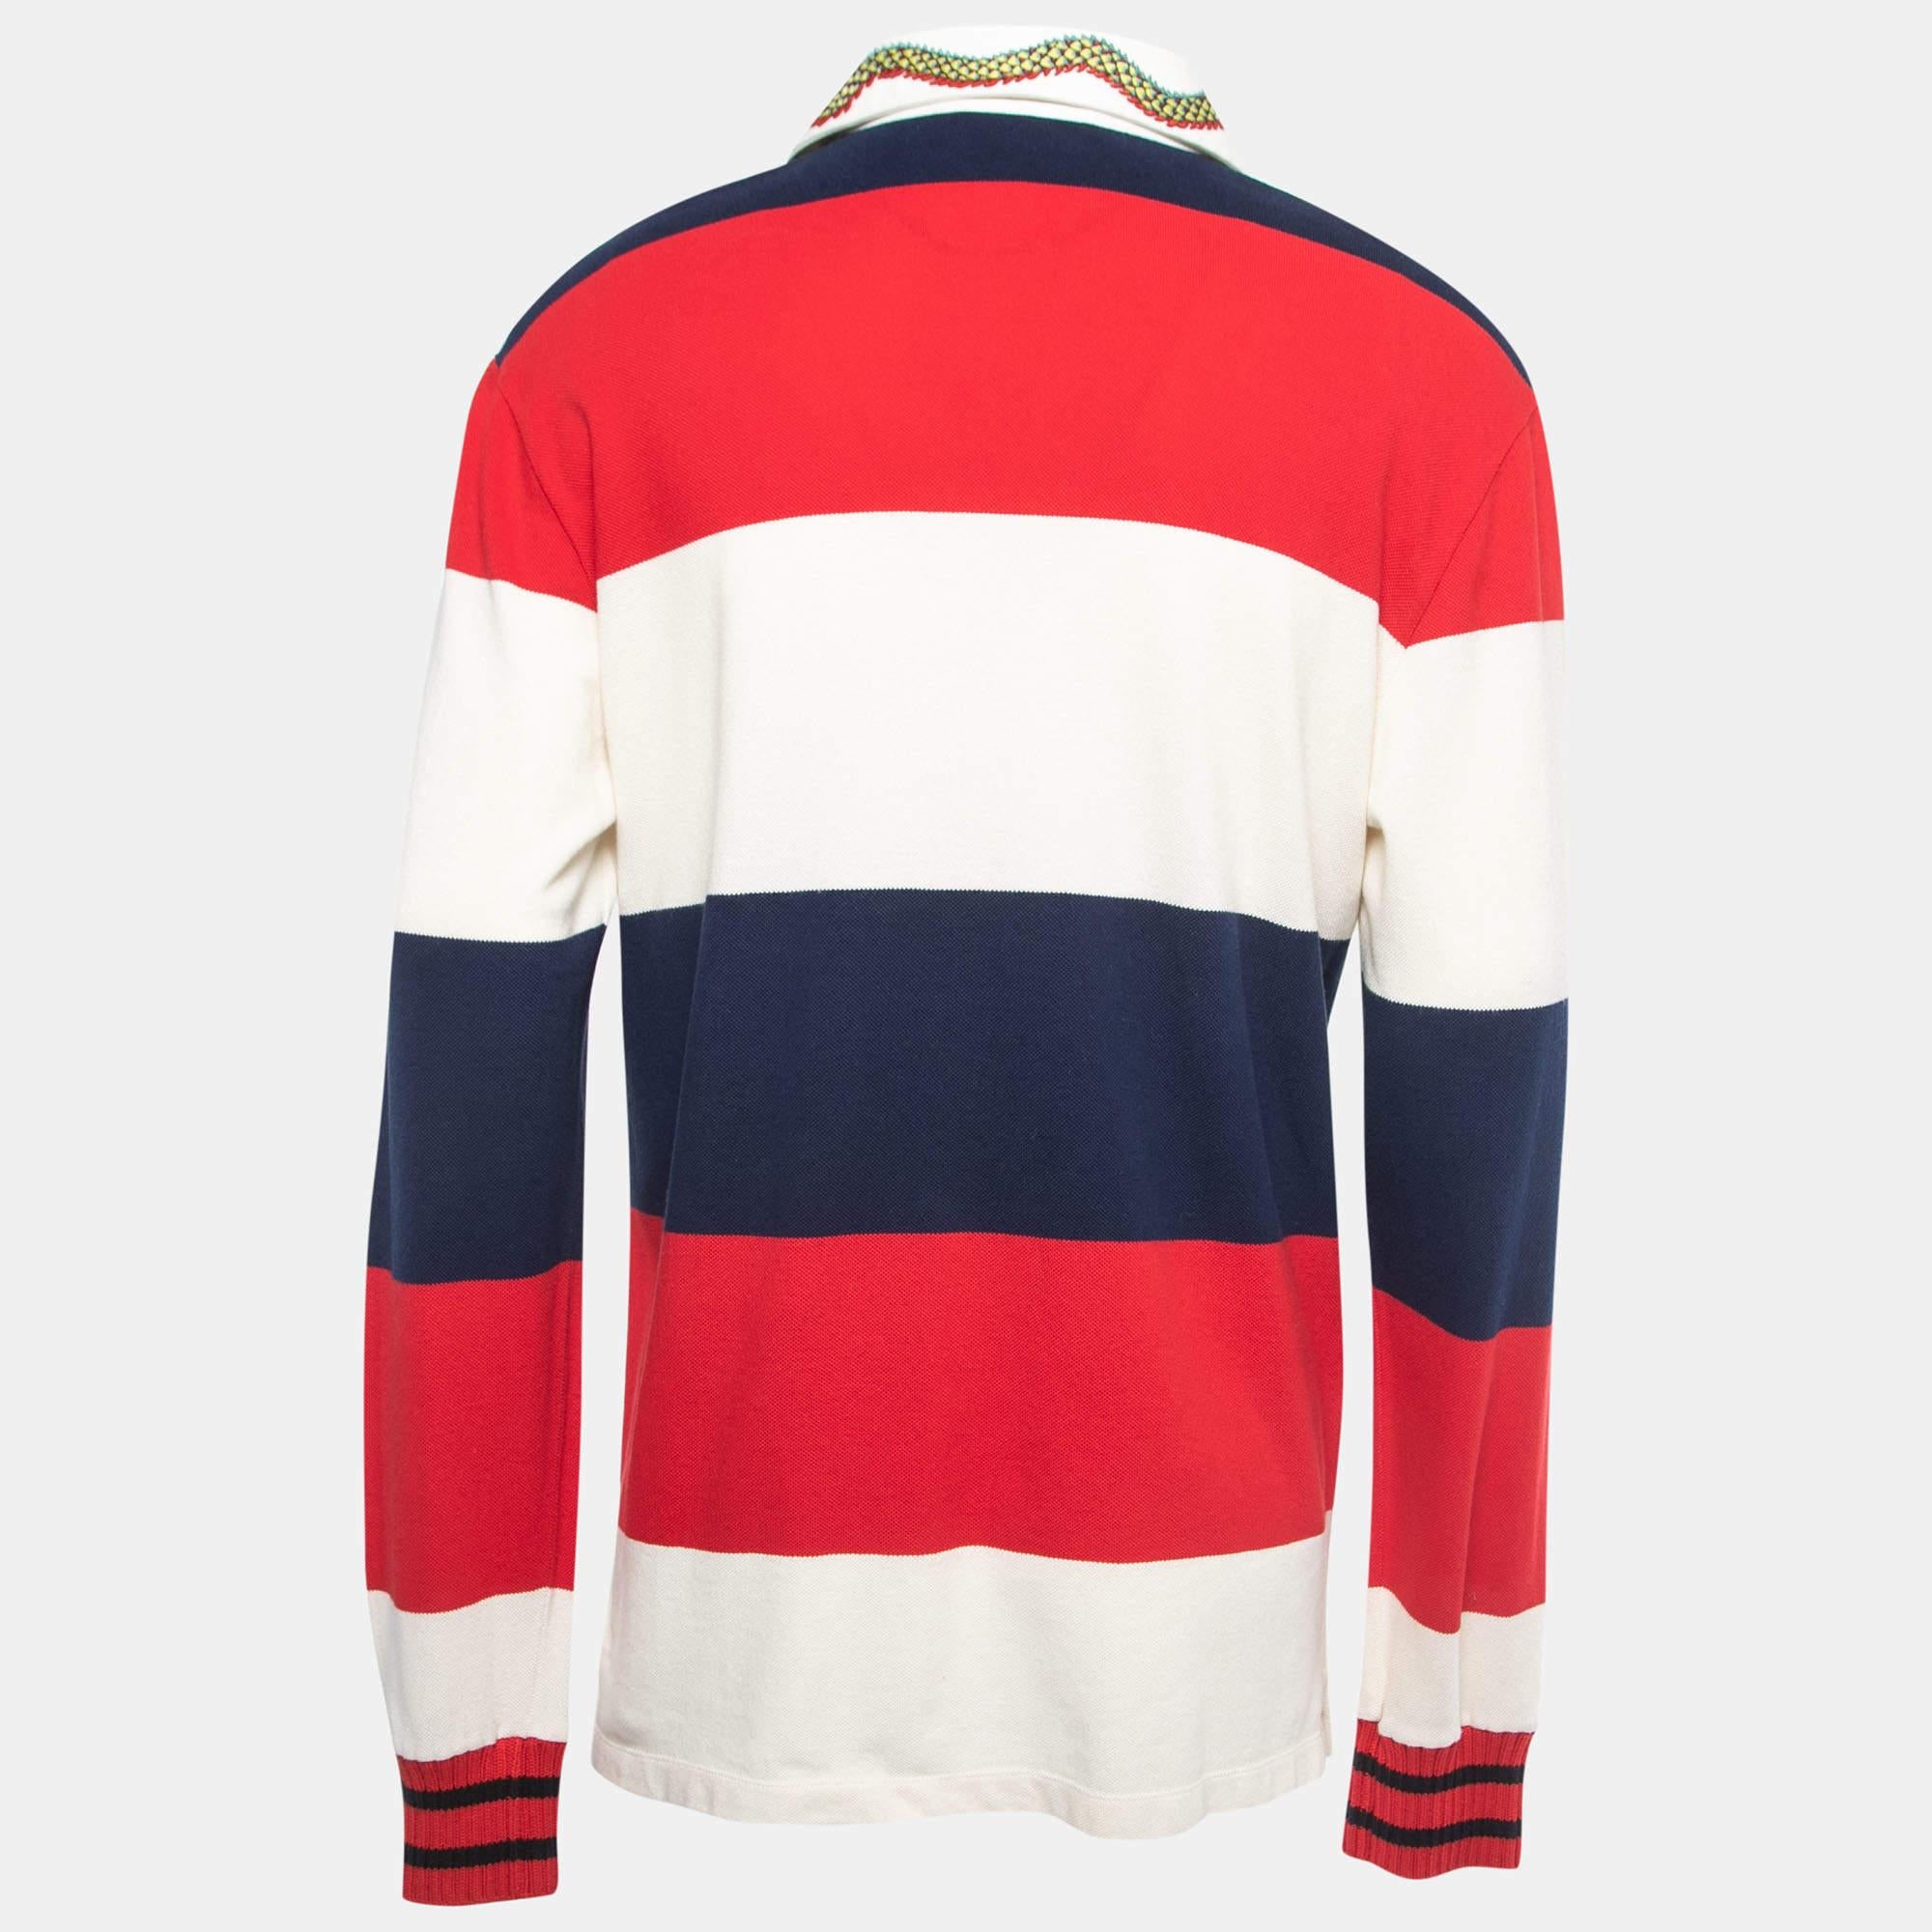 The Gucci t-Shirt combines vibrant stripes in various hues, crafted from comfortable cotton knit fabric. Its standout feature is the contrasting collar, adding a touch of sophistication. With long sleeves, it blends style and comfort in a